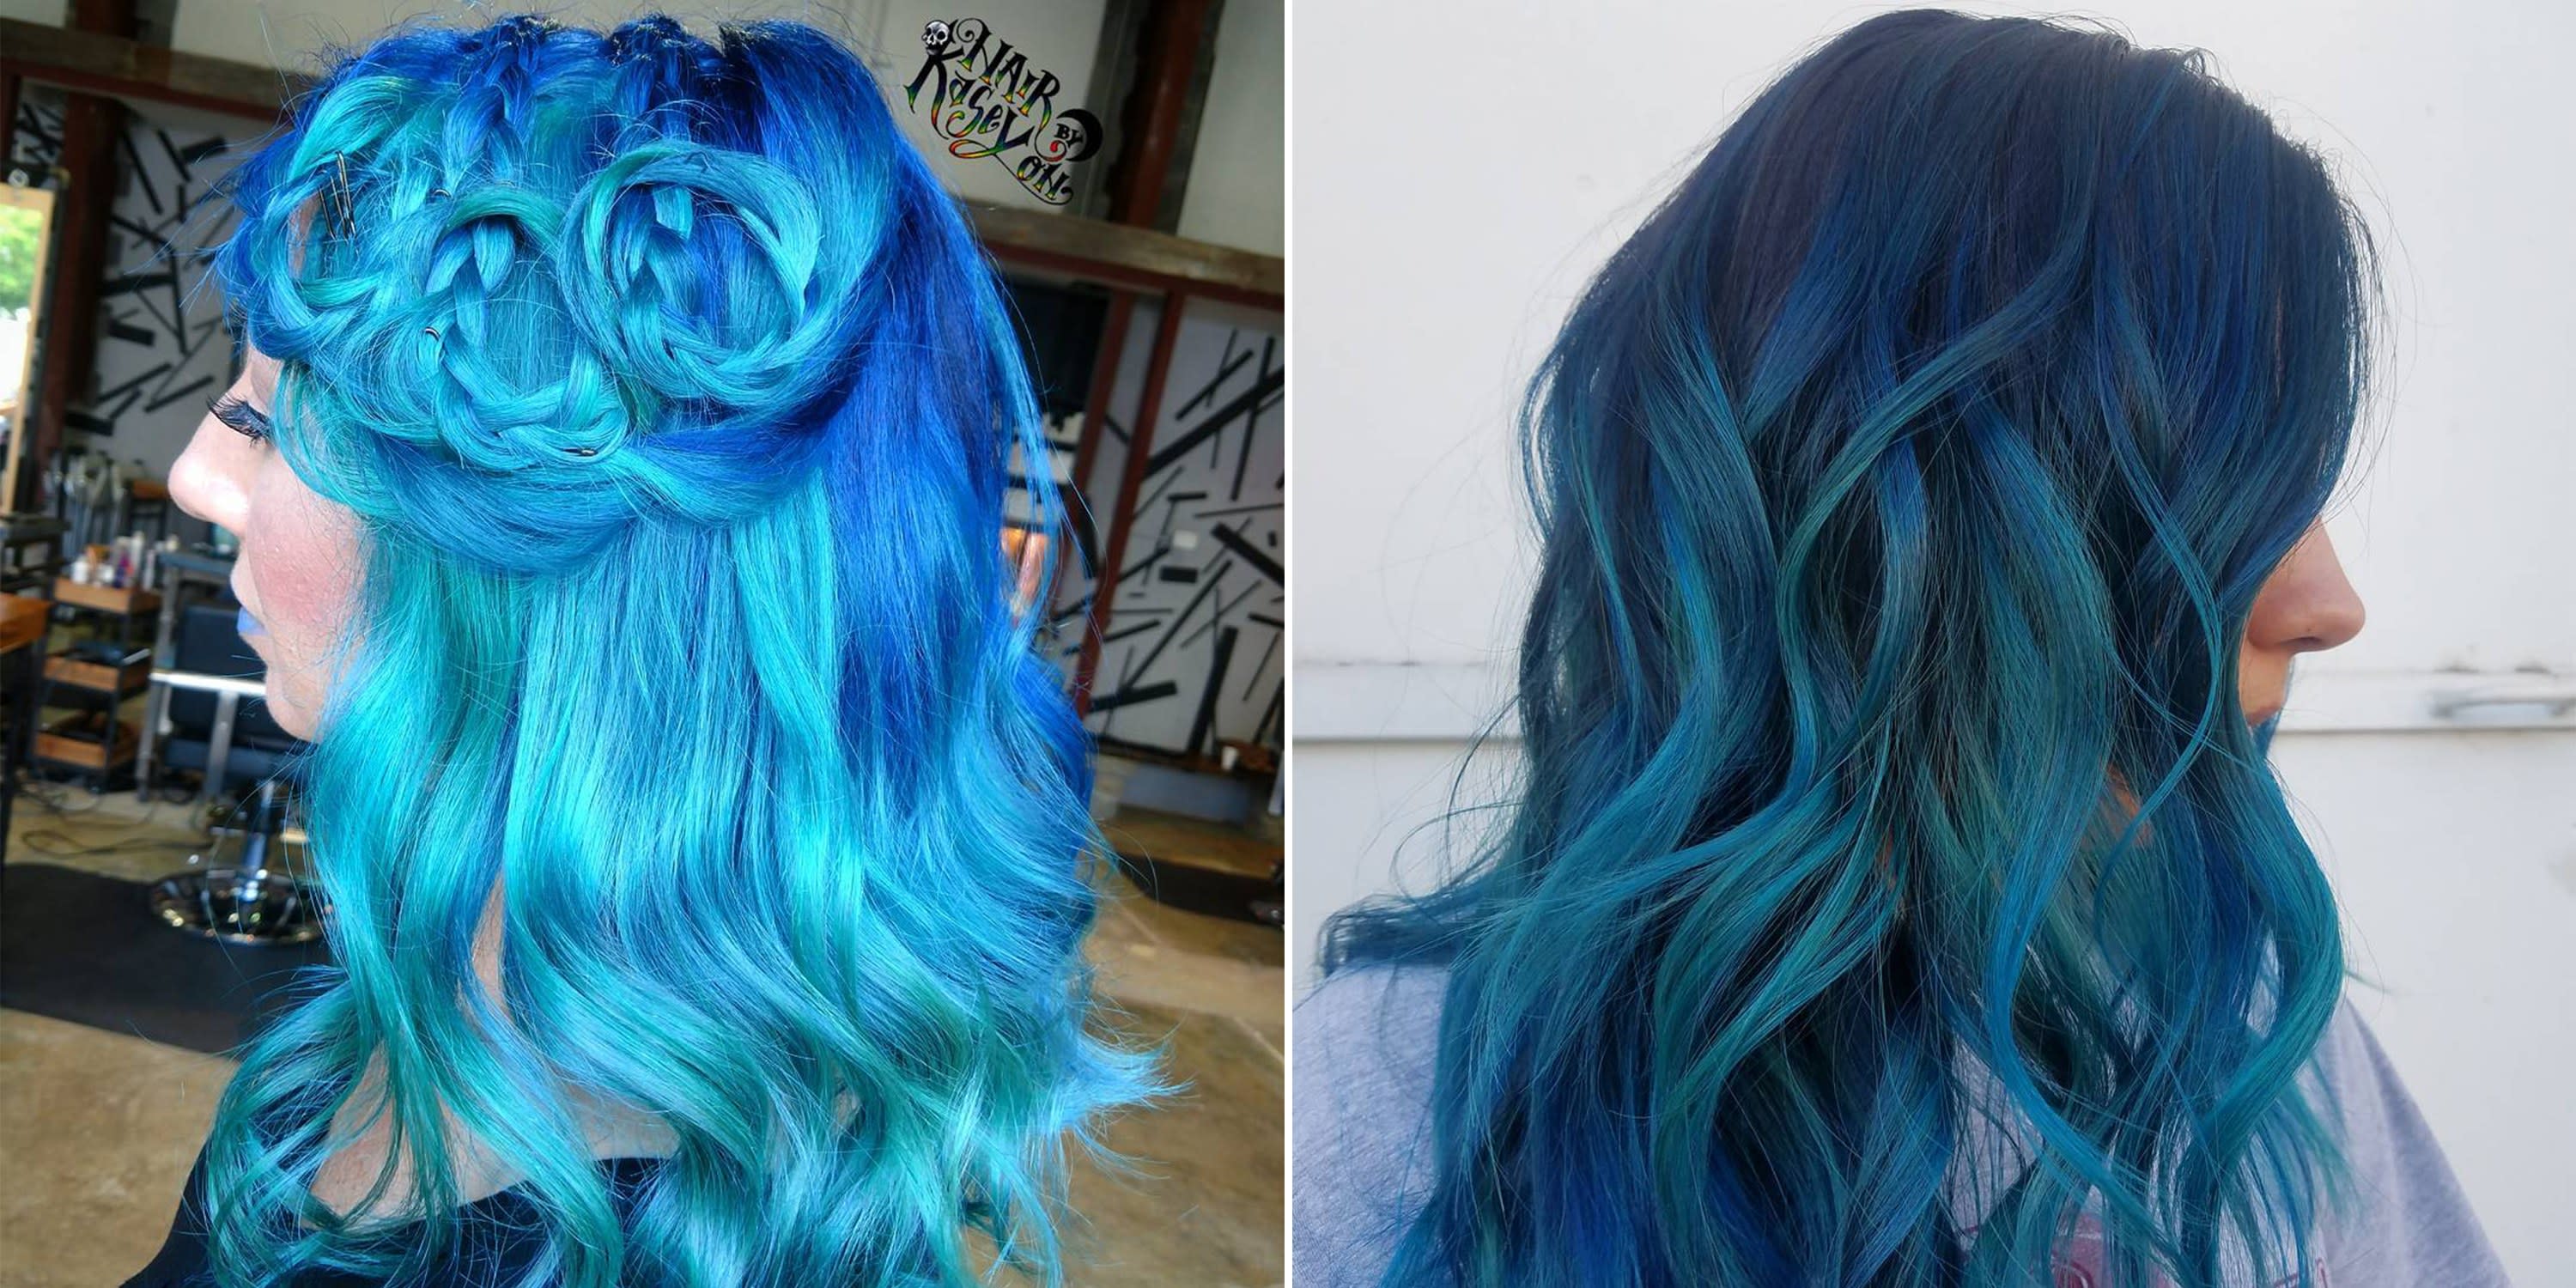 Emerald Blue Hair Color: 10 Stunning Shades to Try - wide 1